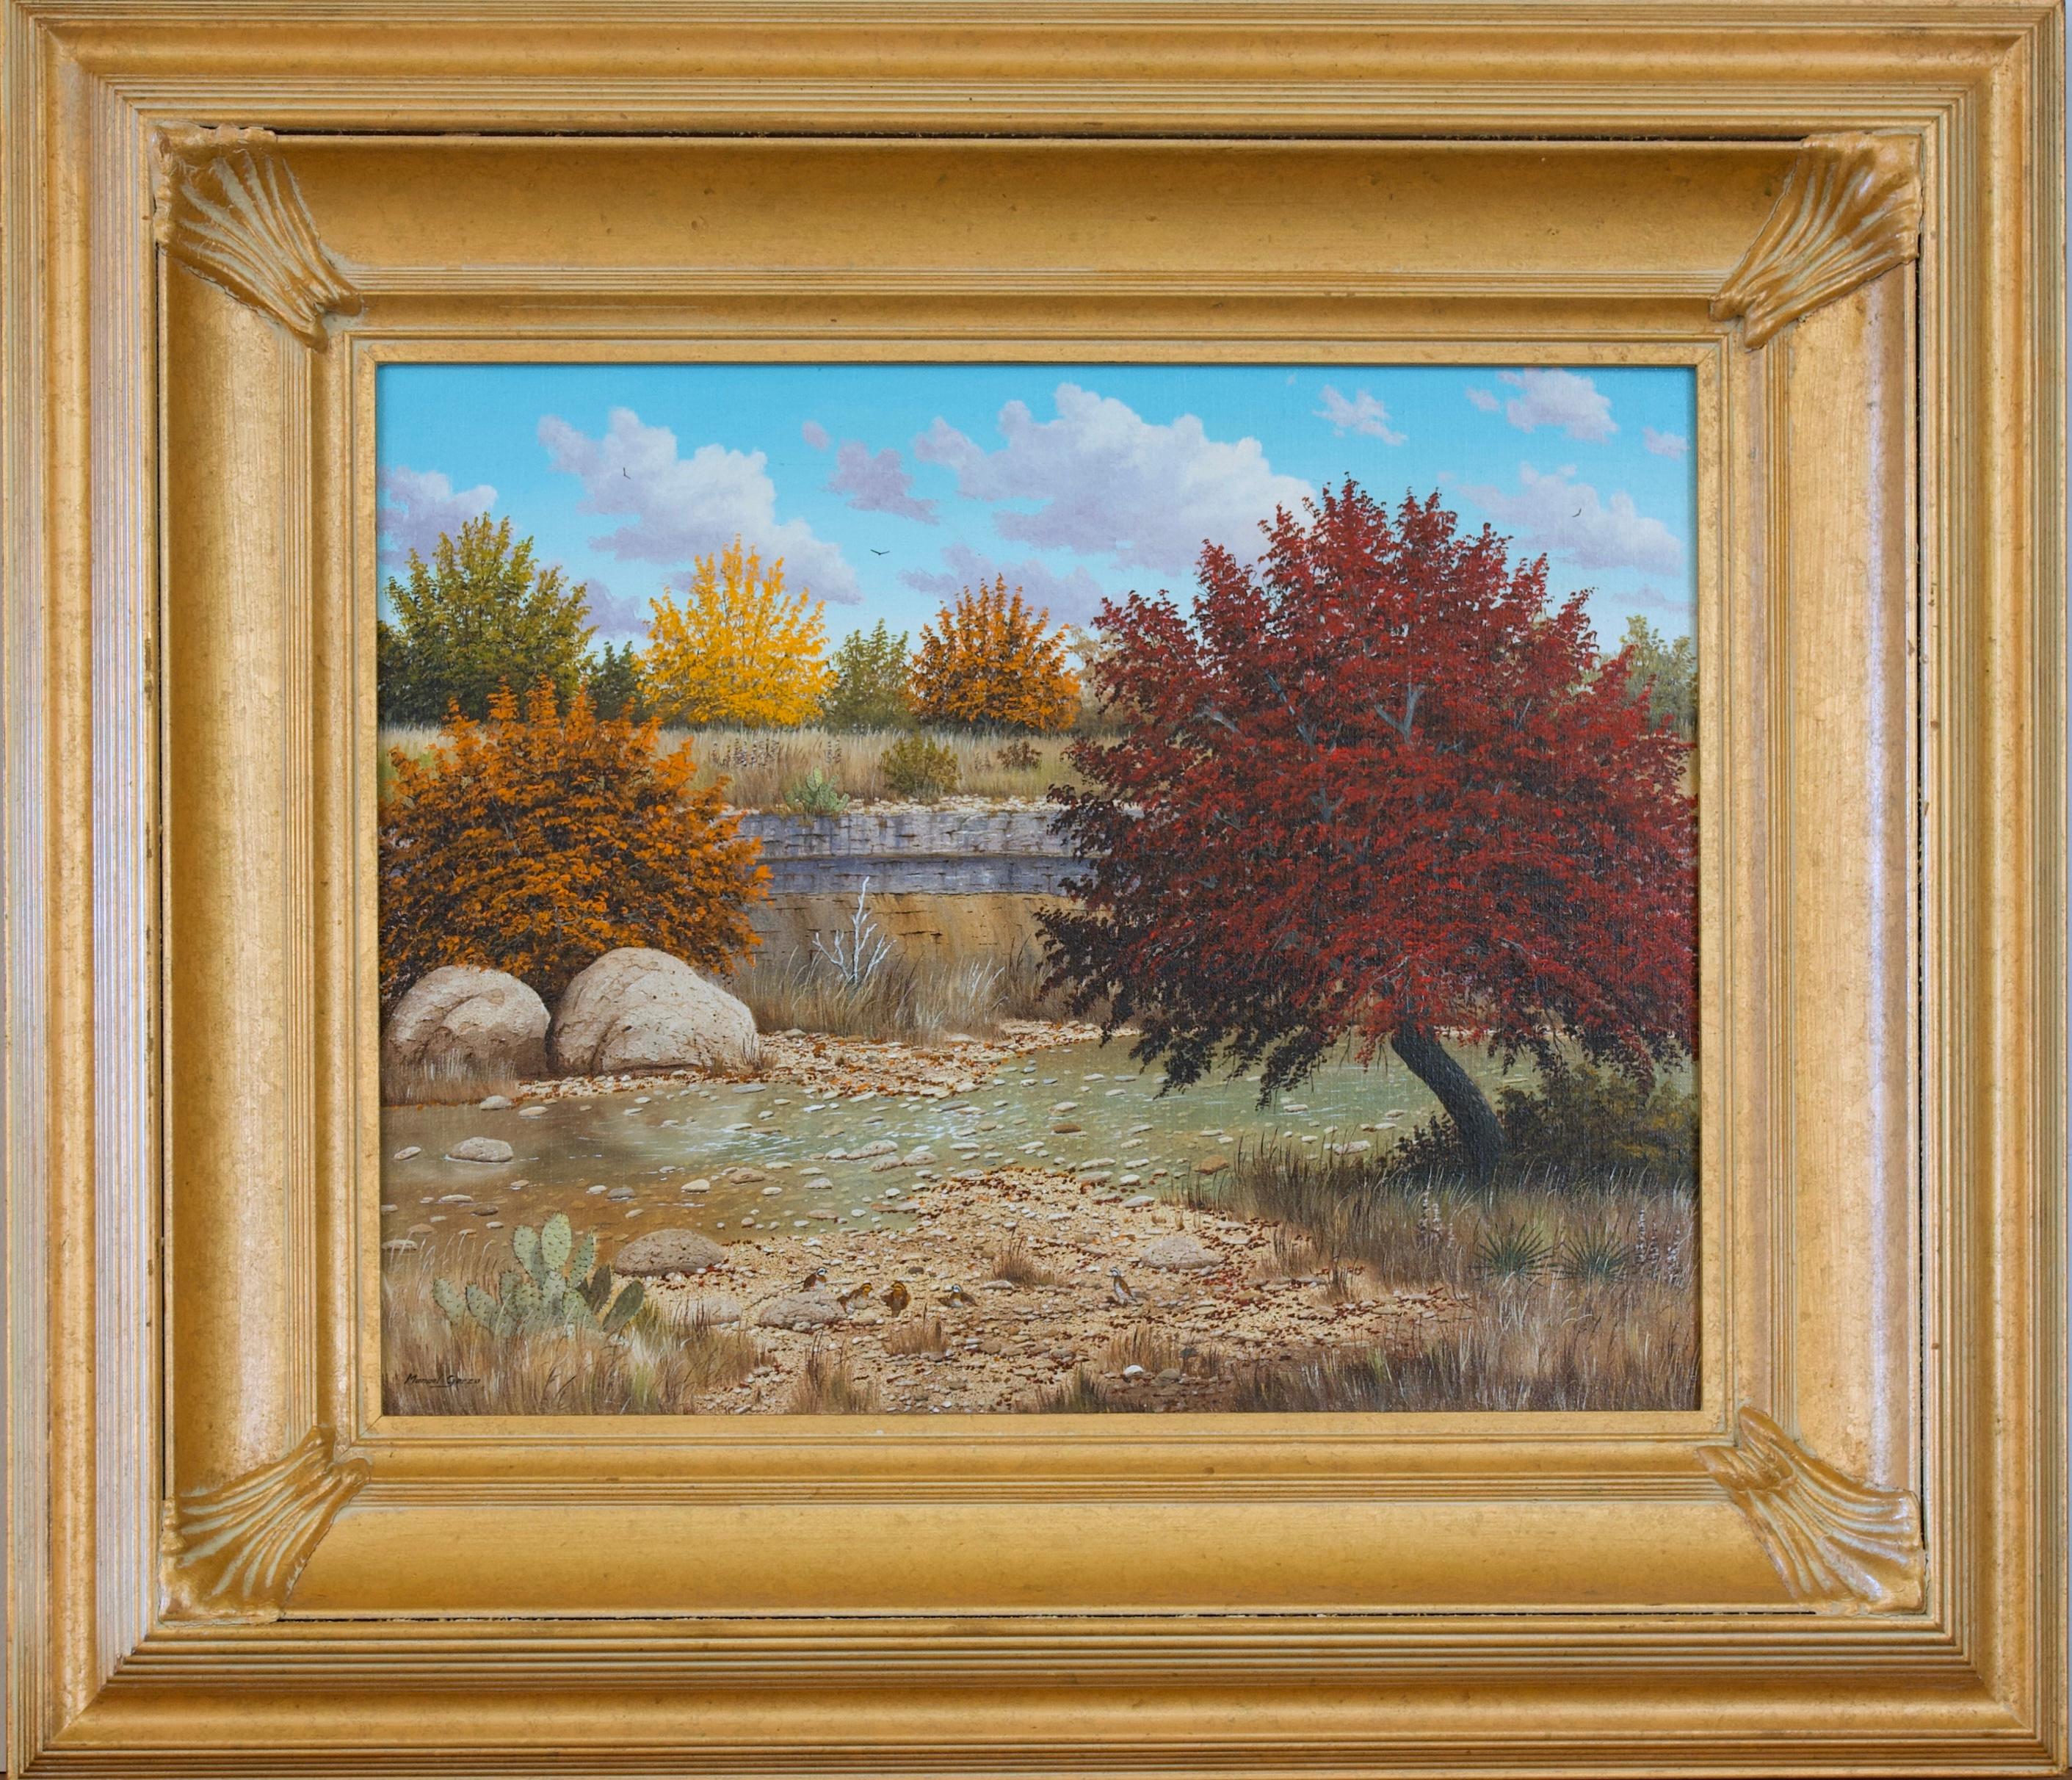 Fall Landscape - Painting by Manuel Garza